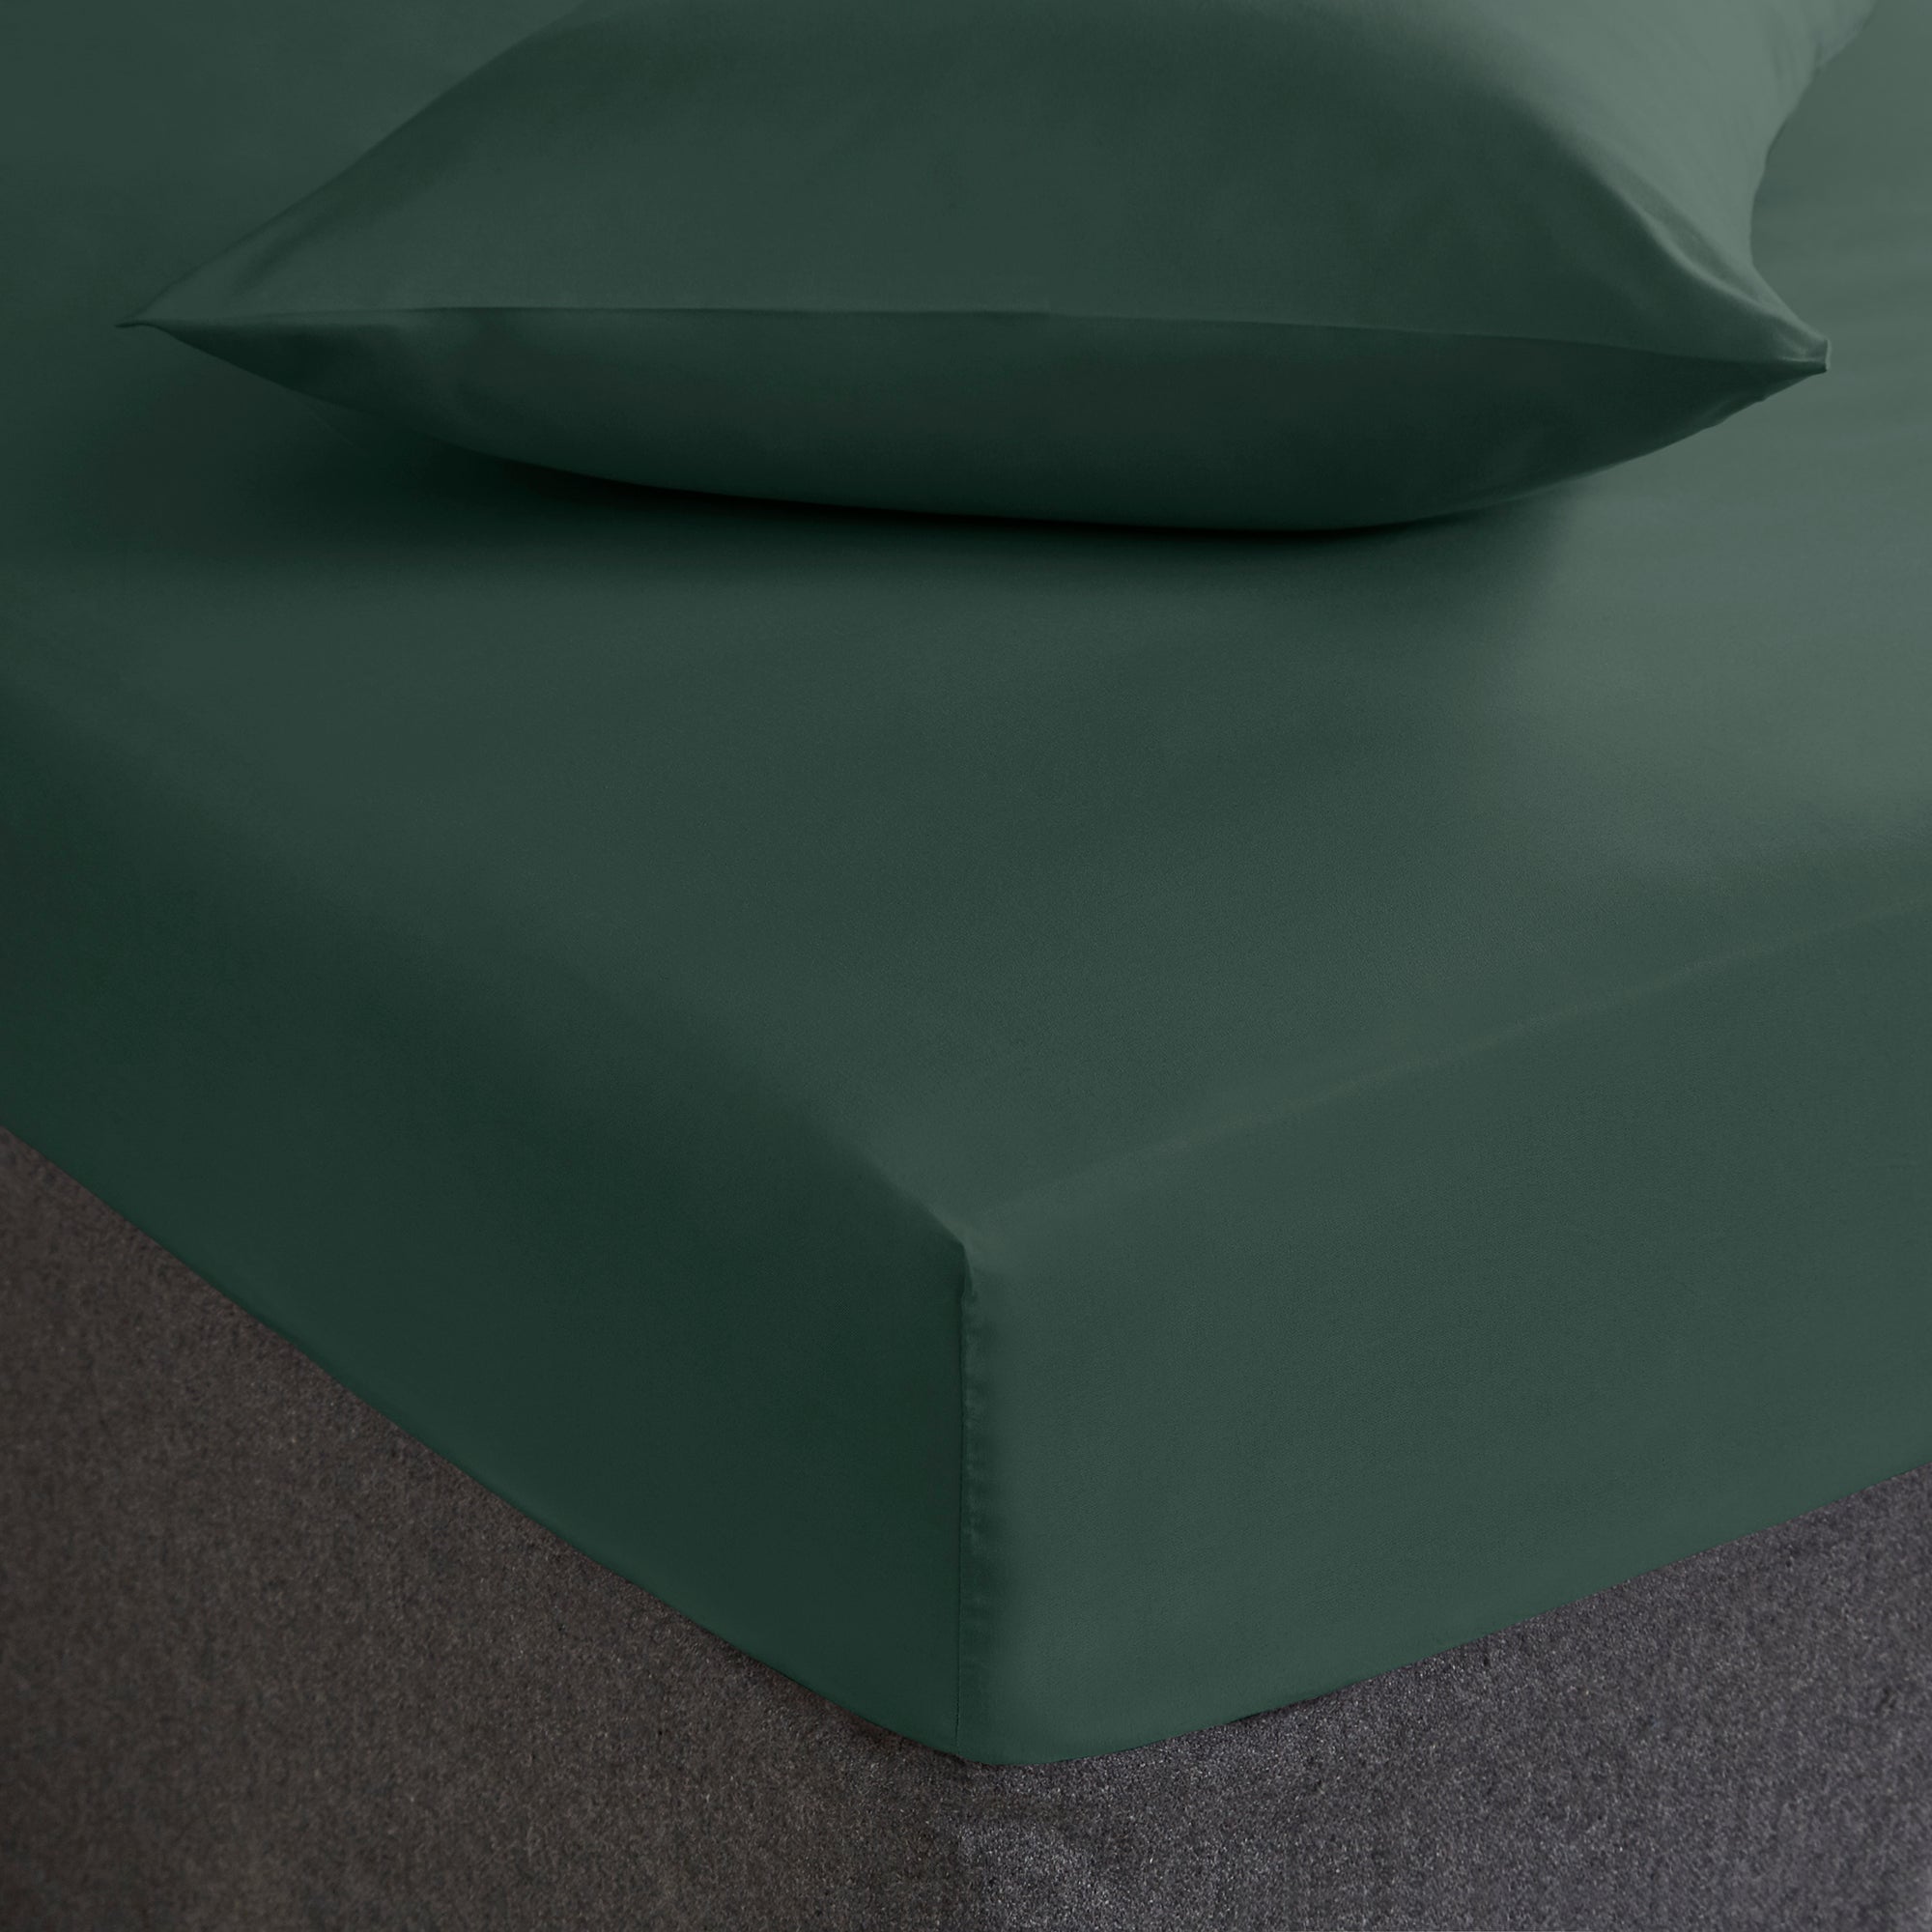 Fogarty Soft Touch Fitted Sheet